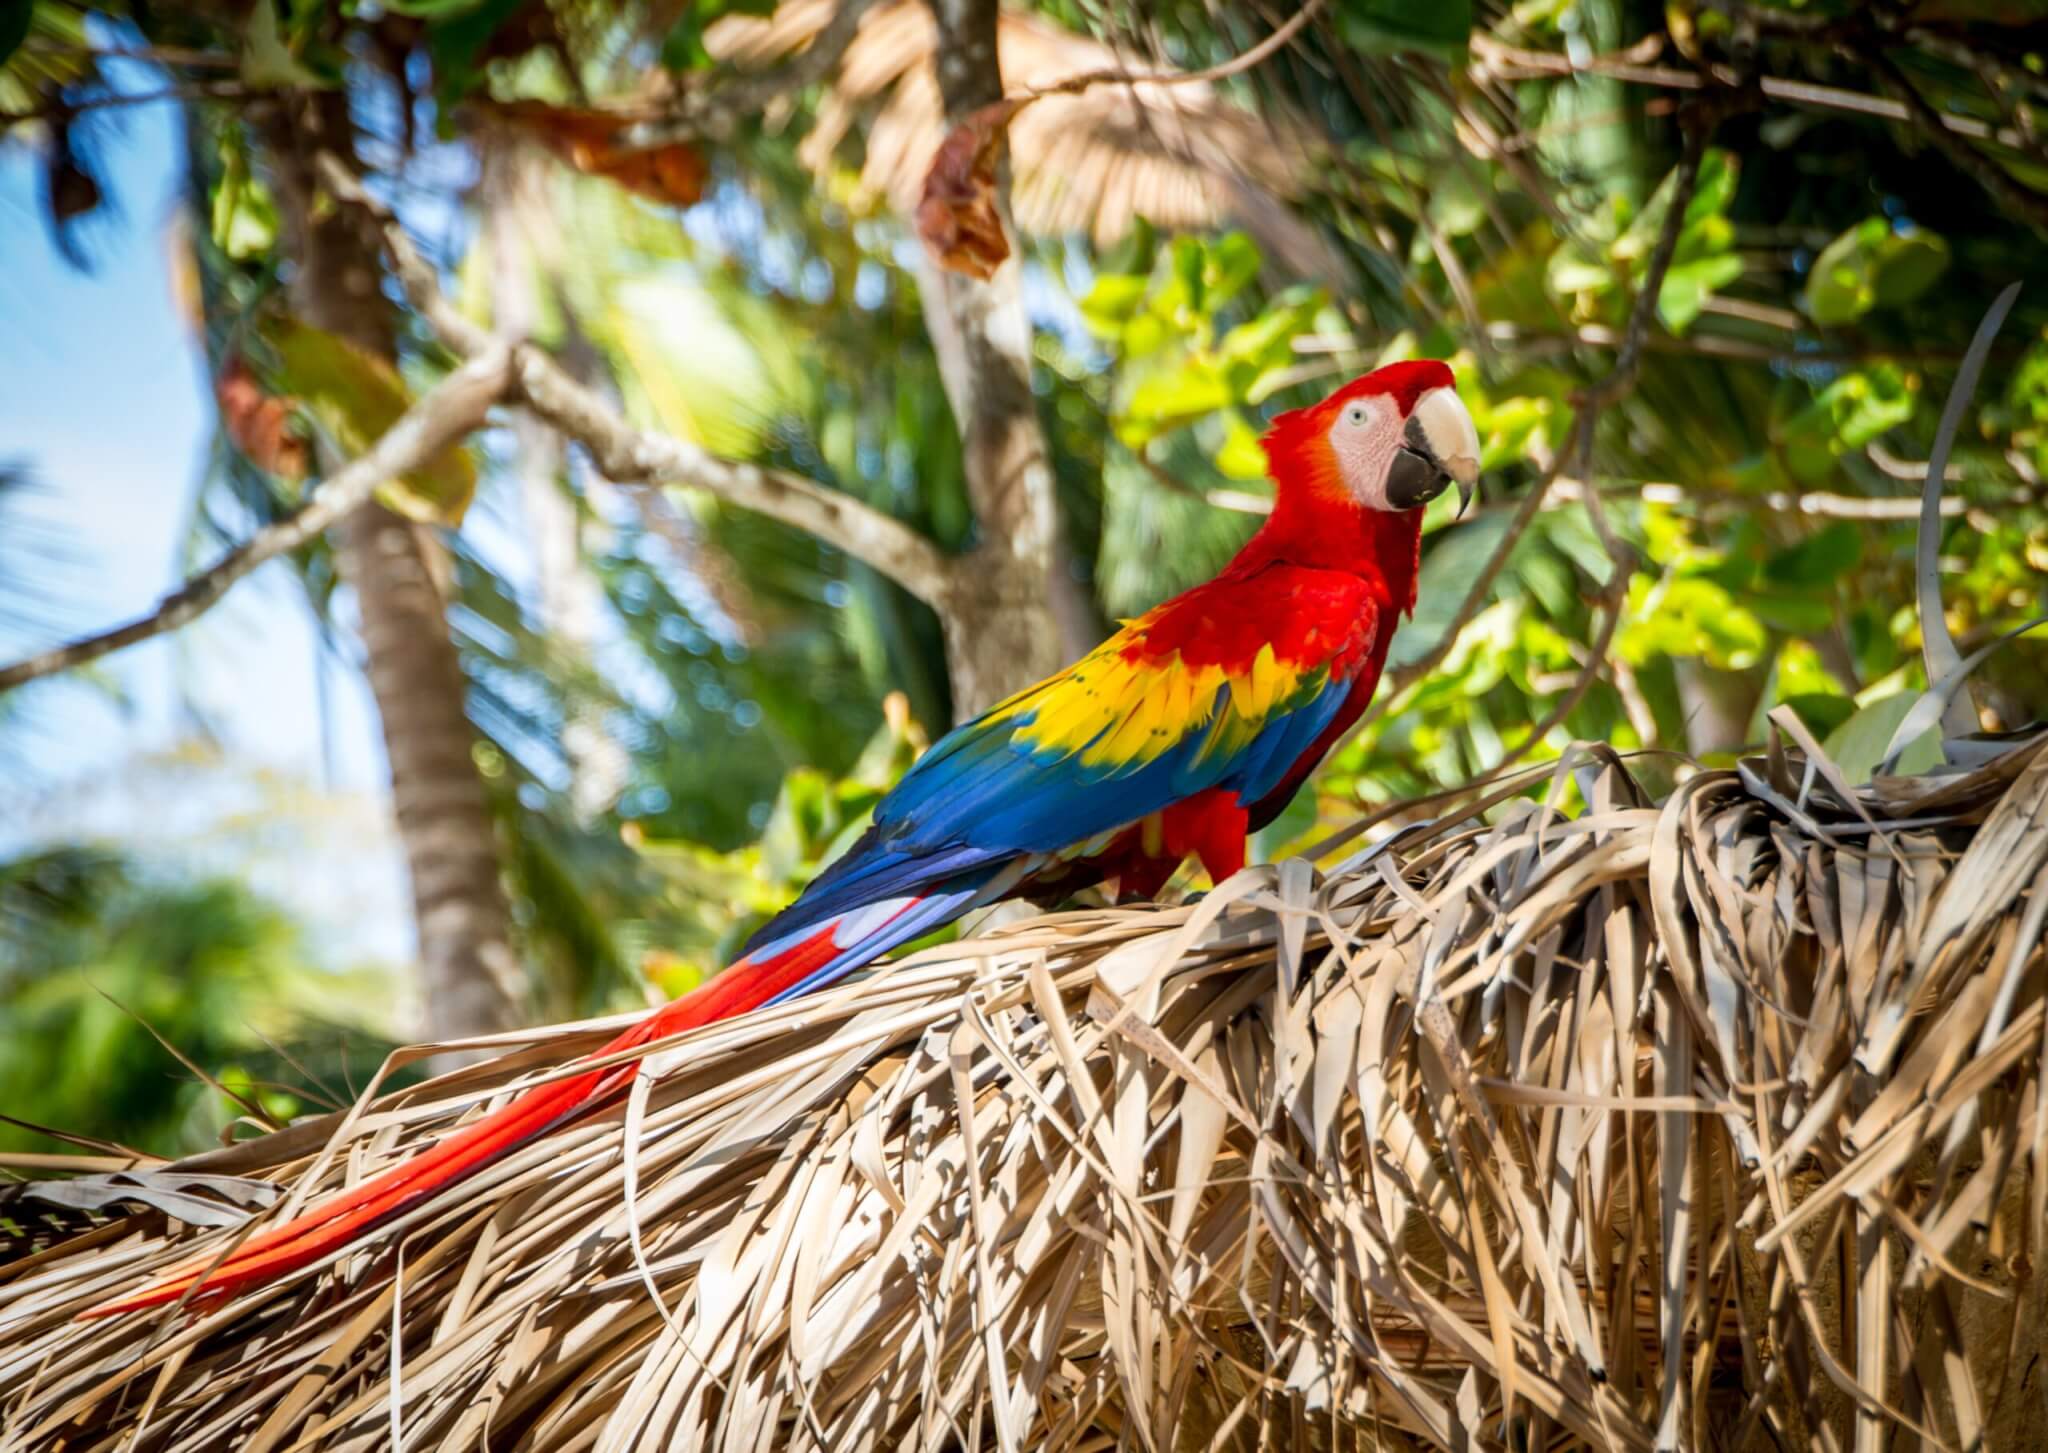 Found this colorful macaw on the island of Isla Tortuga off the western coast of Costa Rica.